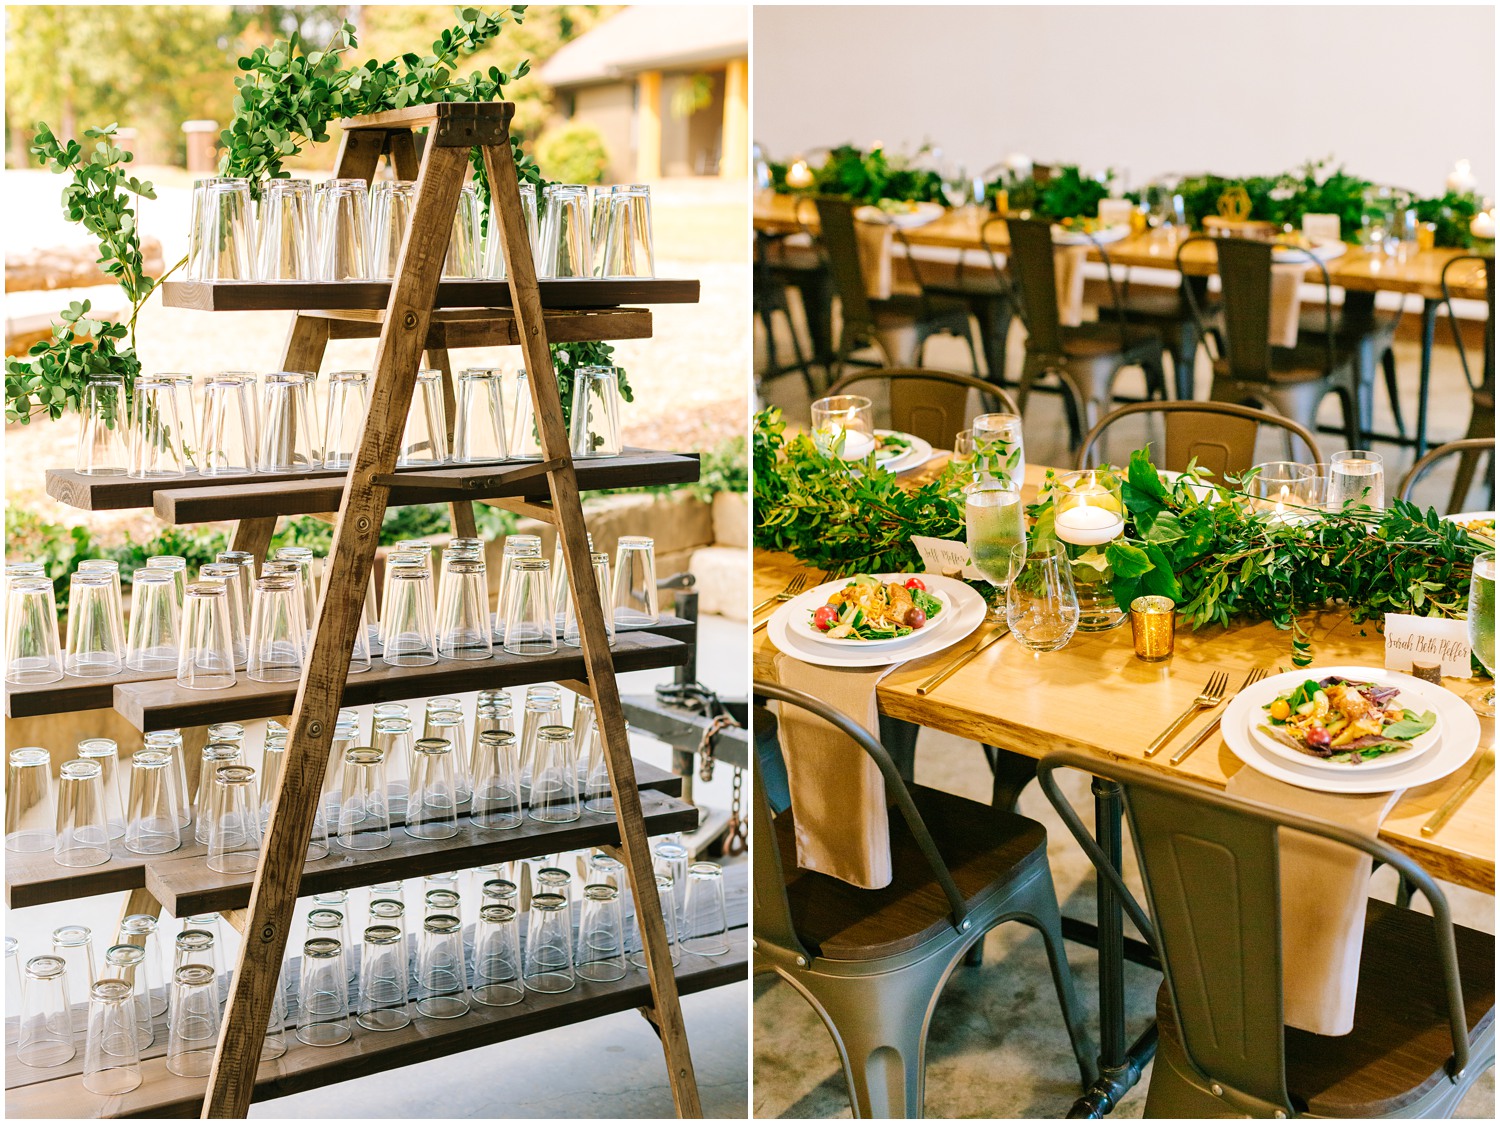 display of glasses and salads for guests at seats